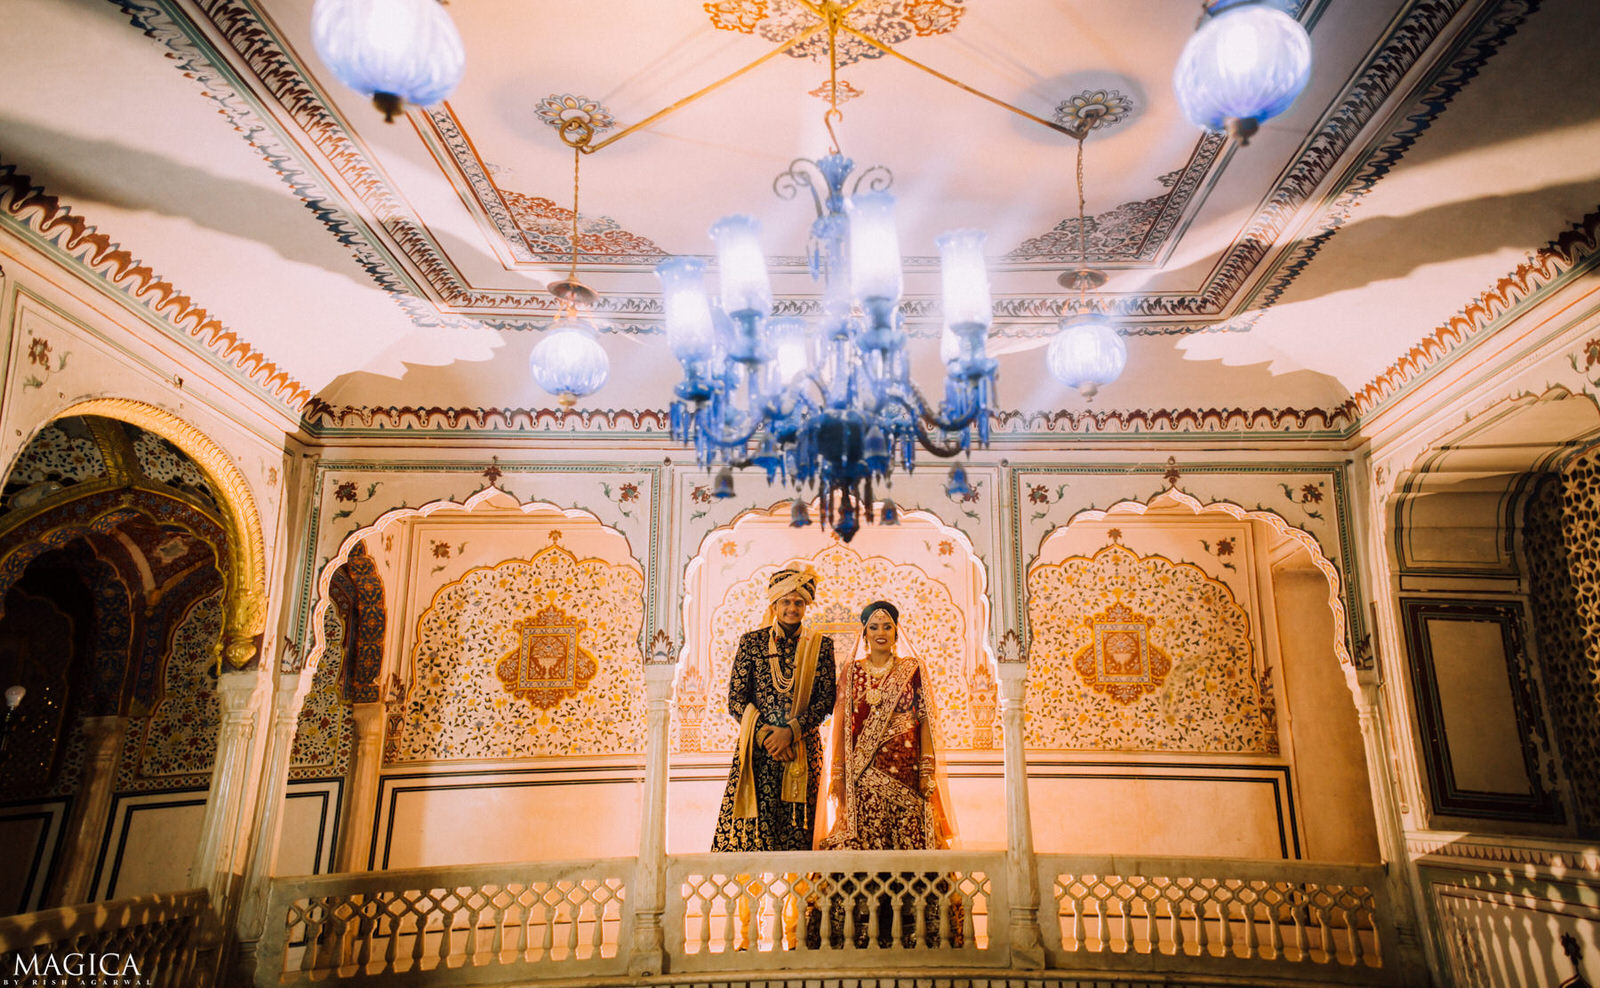 Best South Asian Indian Wedding Photographer and Videographer in USA